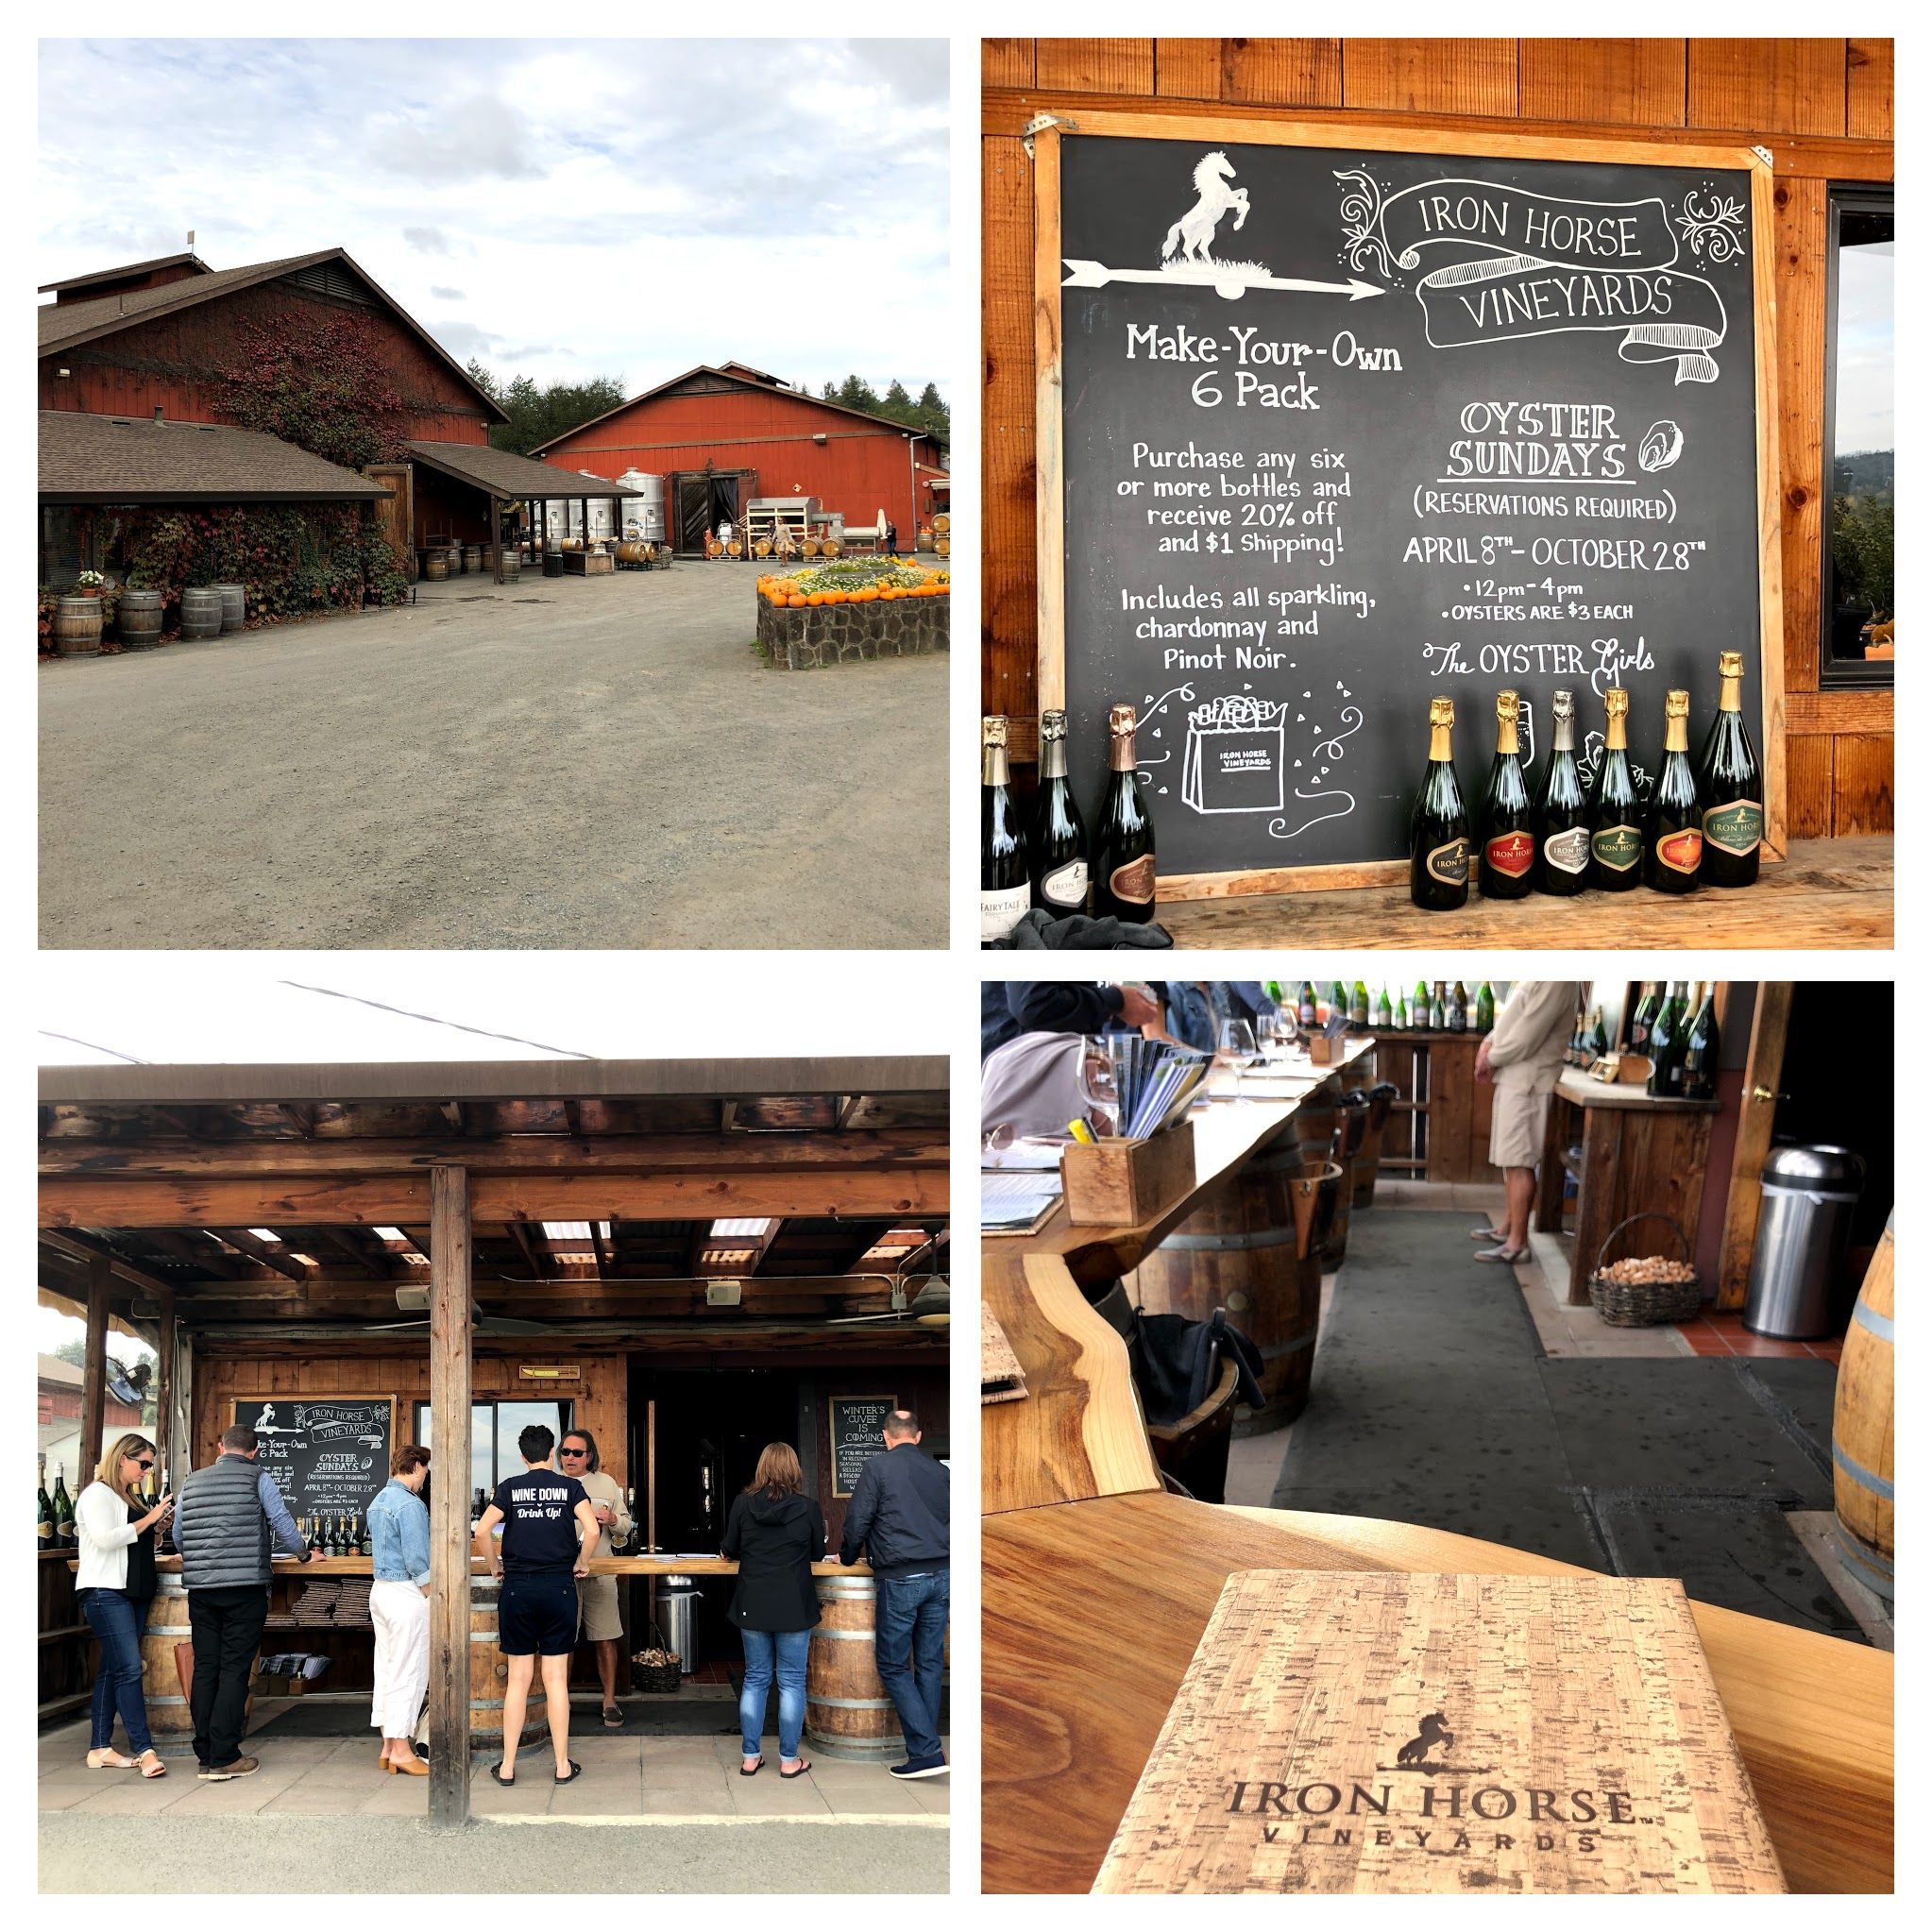 Iron Horse Vineyards is a small, working winery. Photo Collage Credit: @KarenVChin